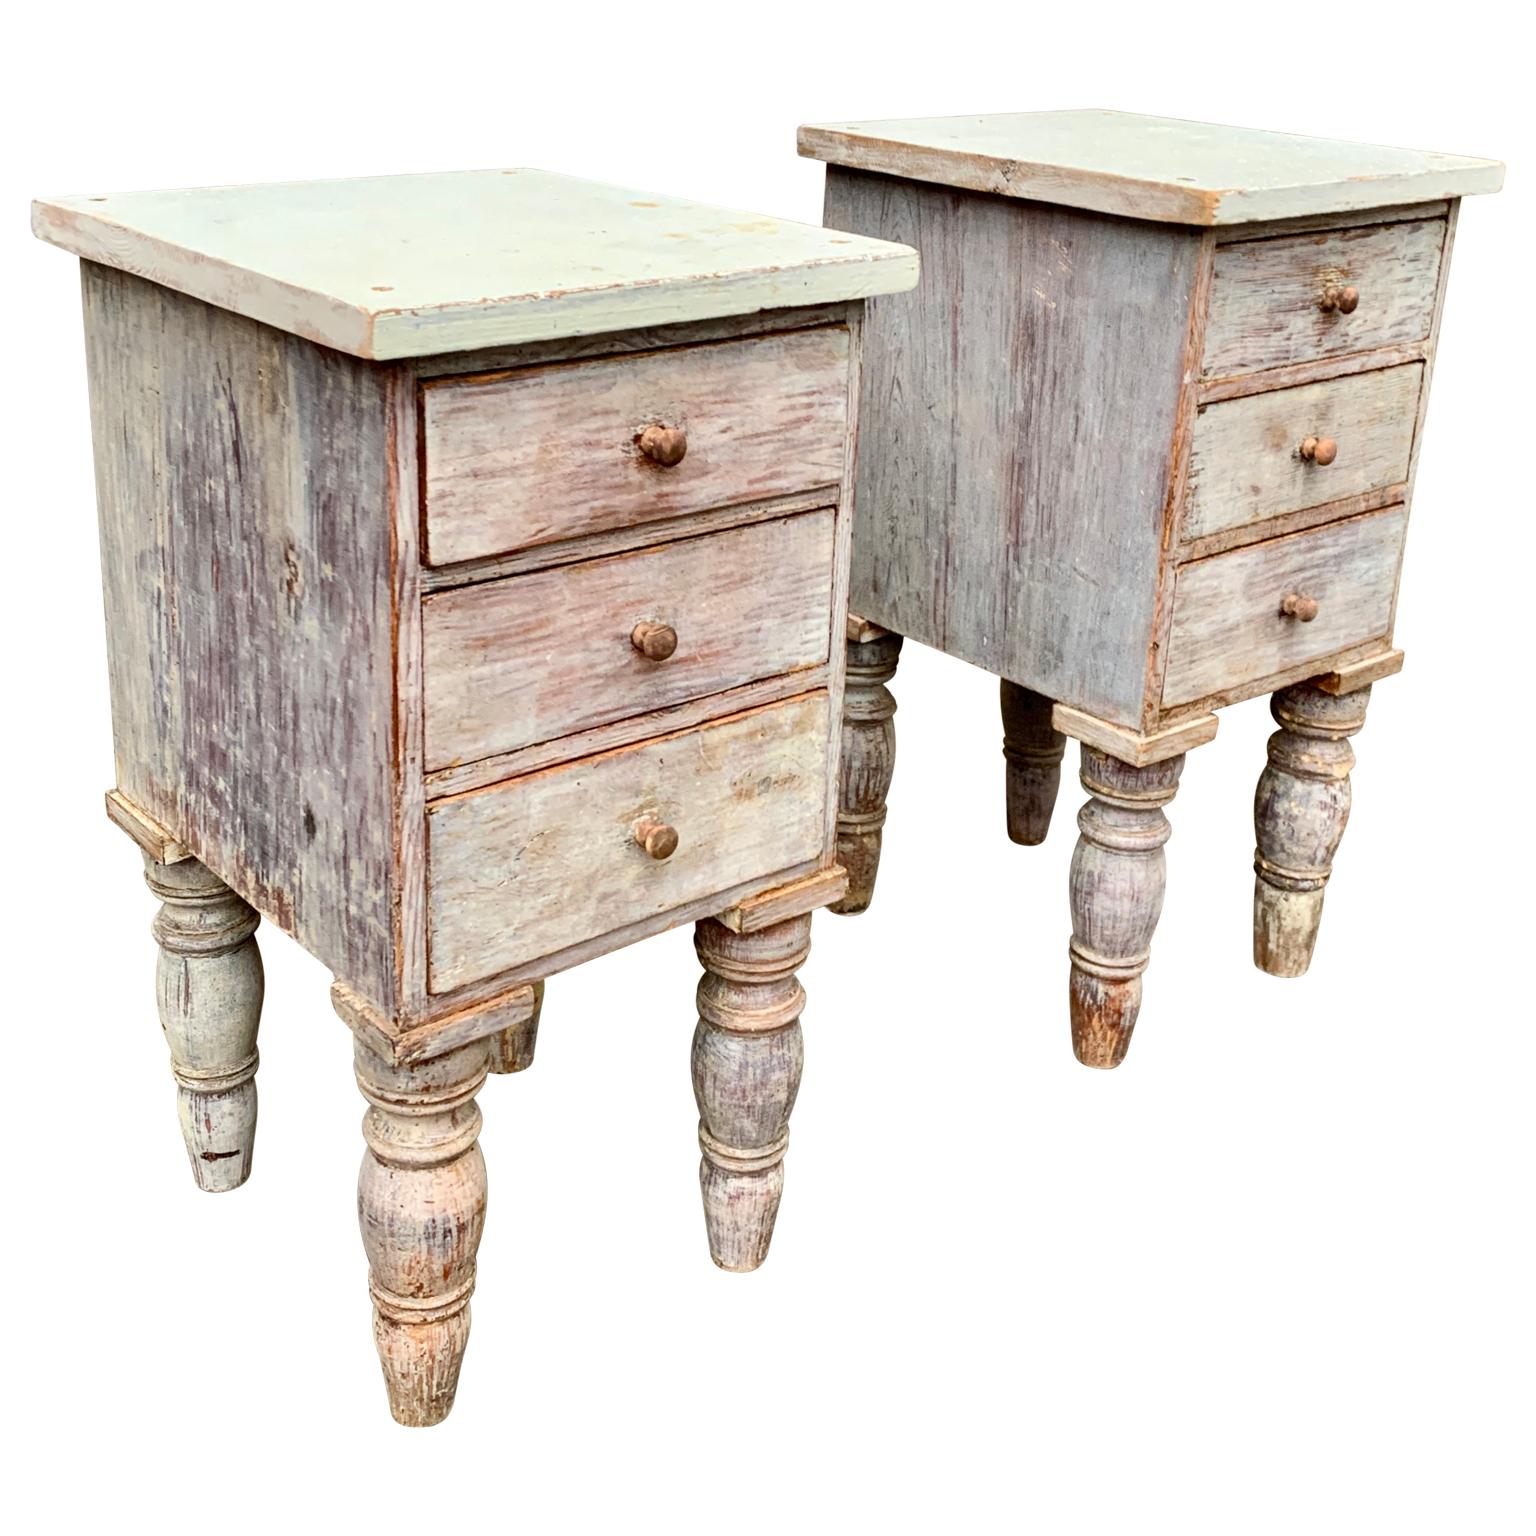 A pair of Swedish nightstands or night tables from the early 19th Century in painted pine wood. These folk Art Gustavian pieces each have 3 clean and working drawers with wooden handles to open them. The color and patina is the original and have